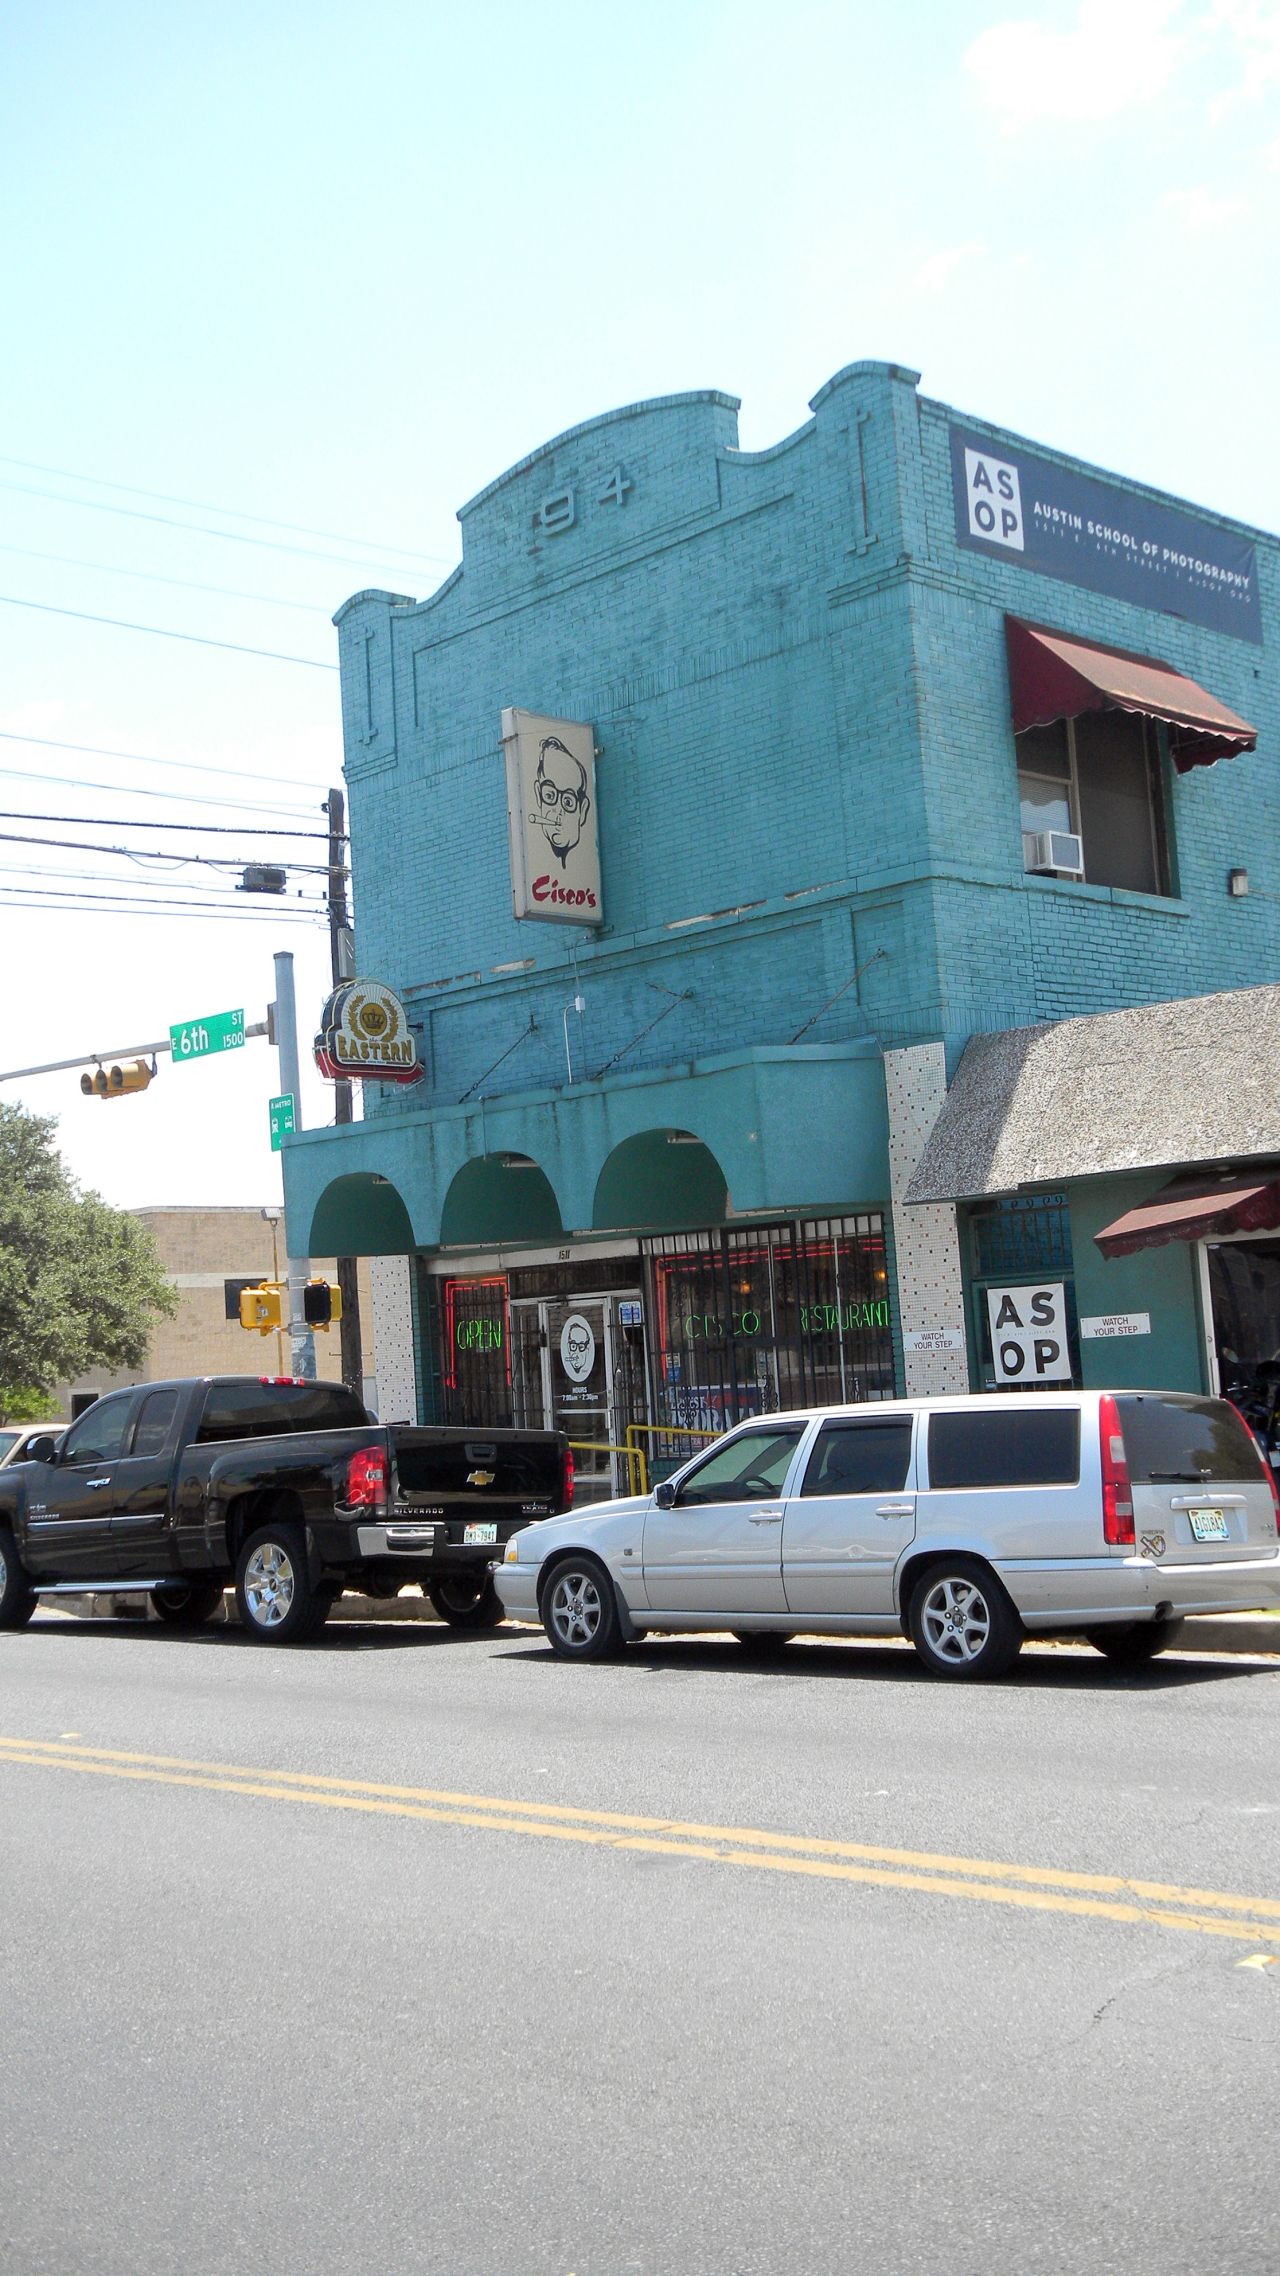 Widely known for serving the best breakfast in Austin, 62-year-old Tex-Mex spot Cisco's has long been a hangout for Austin's politicos.